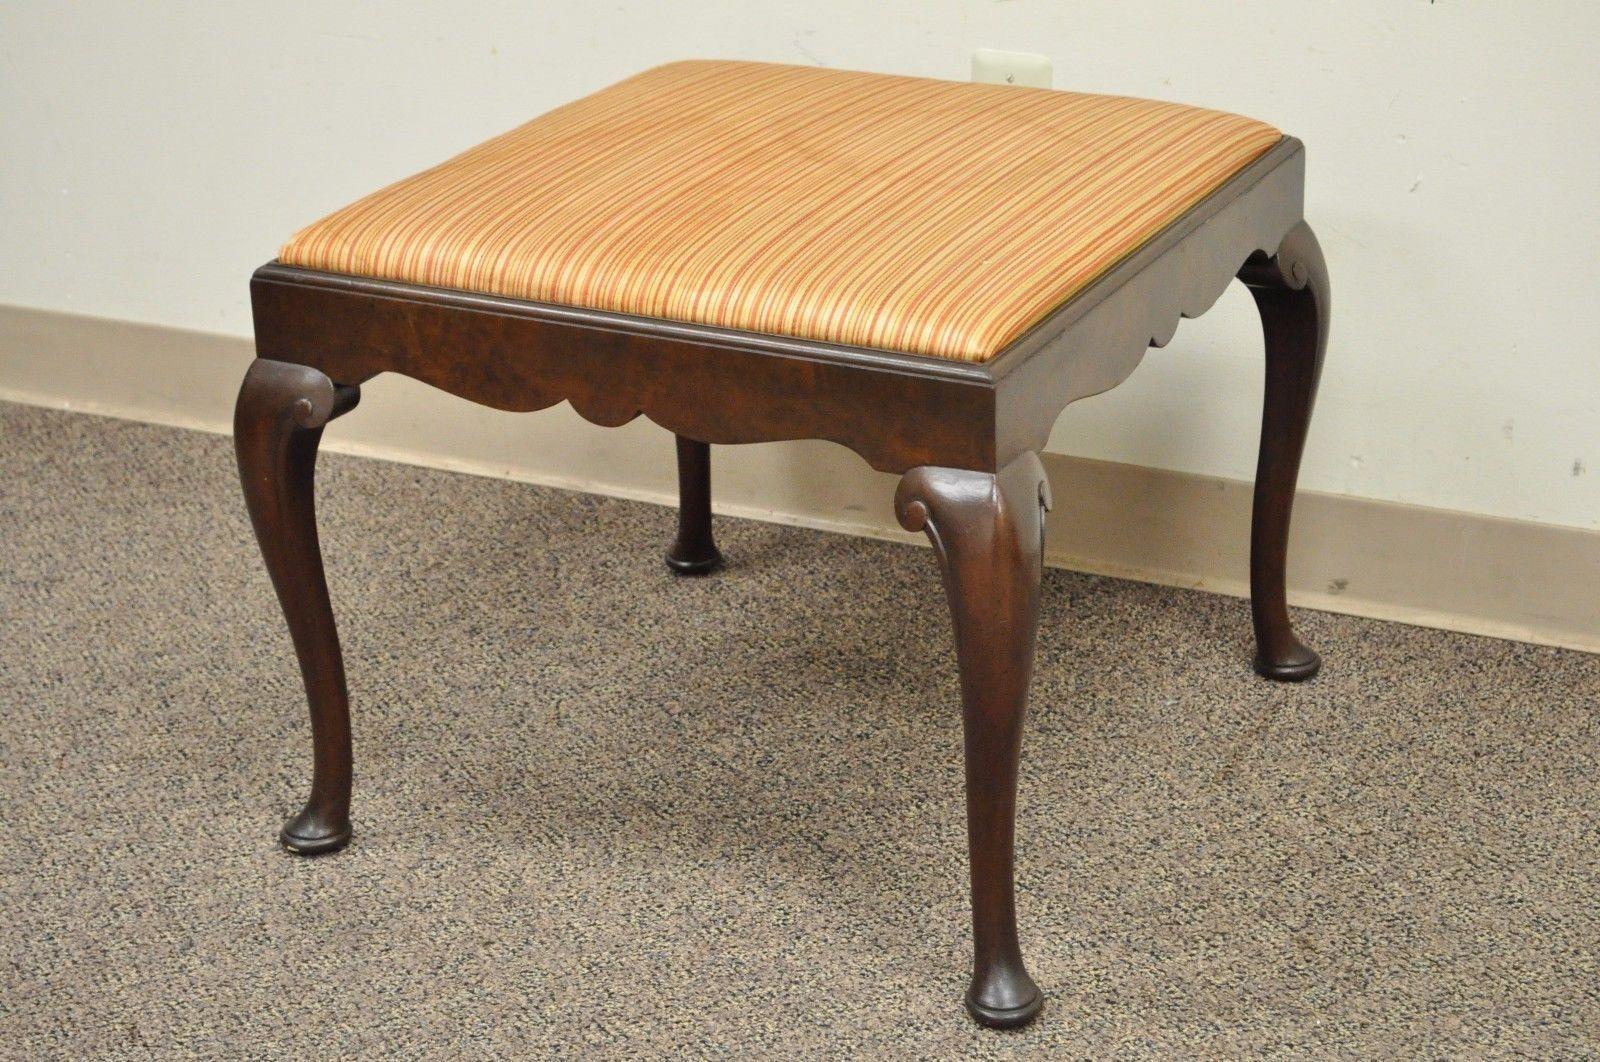 Antique Schmieg & Kotzian Mahogany Wood Queen Anne Square Stool Bench Ottoman For Sale 4